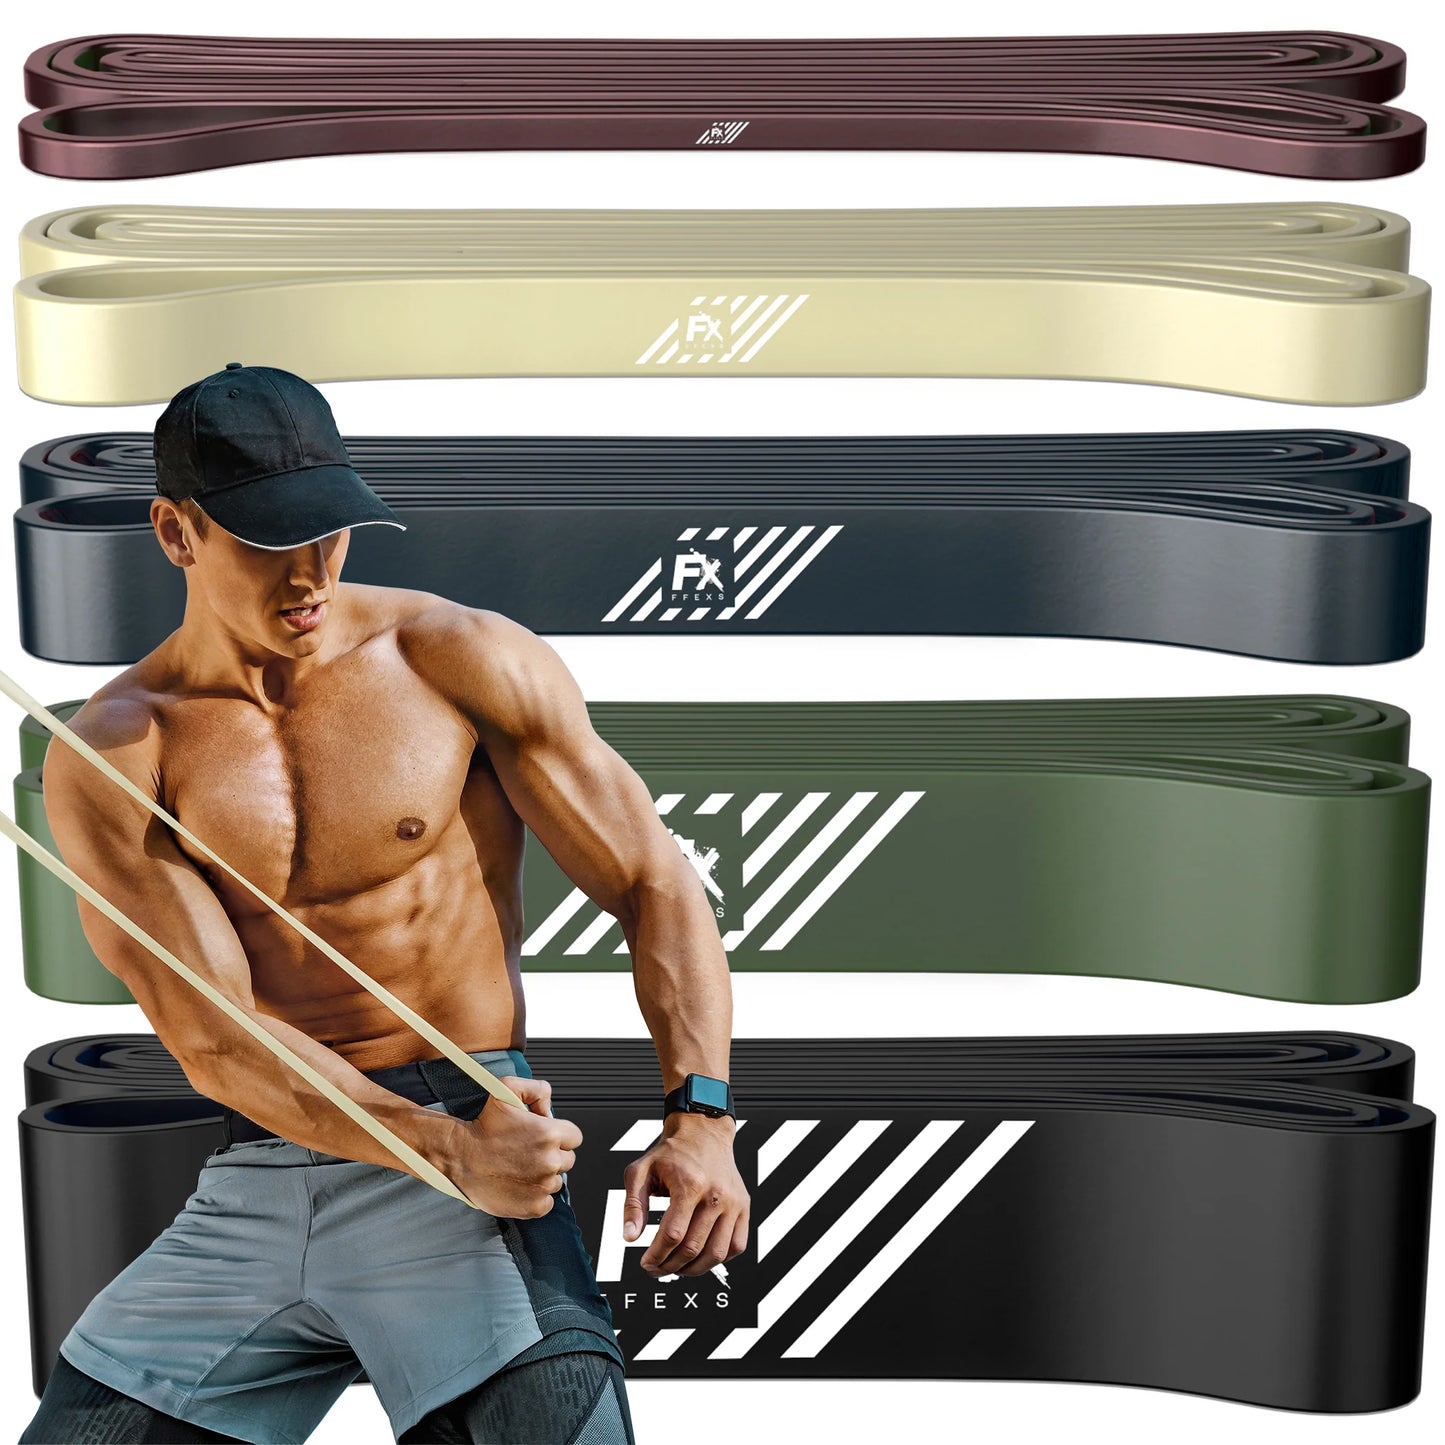 Elastic resistance bands set (5 pieces) for pull-ups and strength training